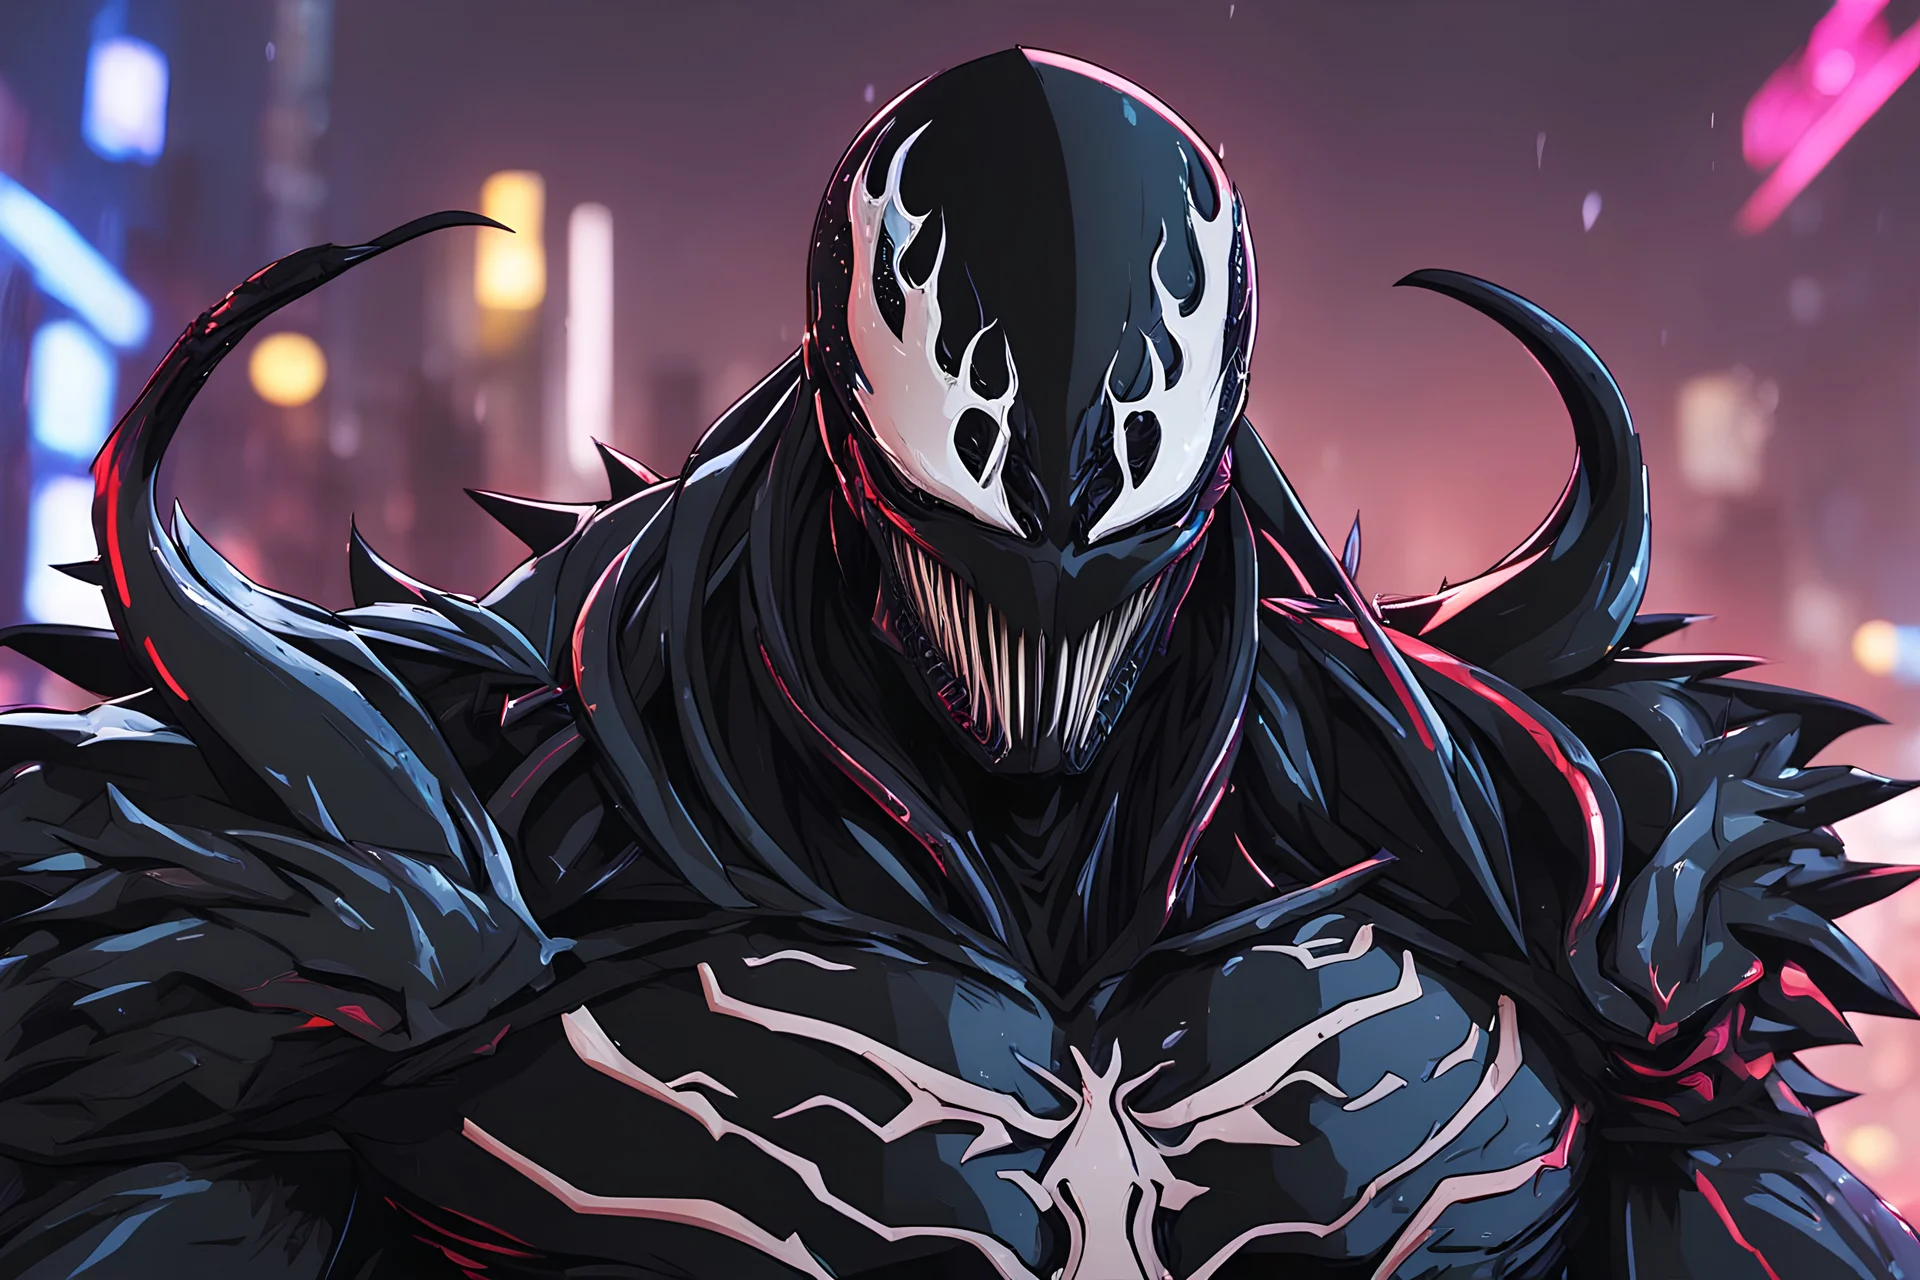 Venom Shredder in 8k solo leveling shadow artstyle, machine them, close picture, rain, neon lights, intricate details, highly detailed, high details, detailed portrait, masterpiece,ultra detailed, ultra quality